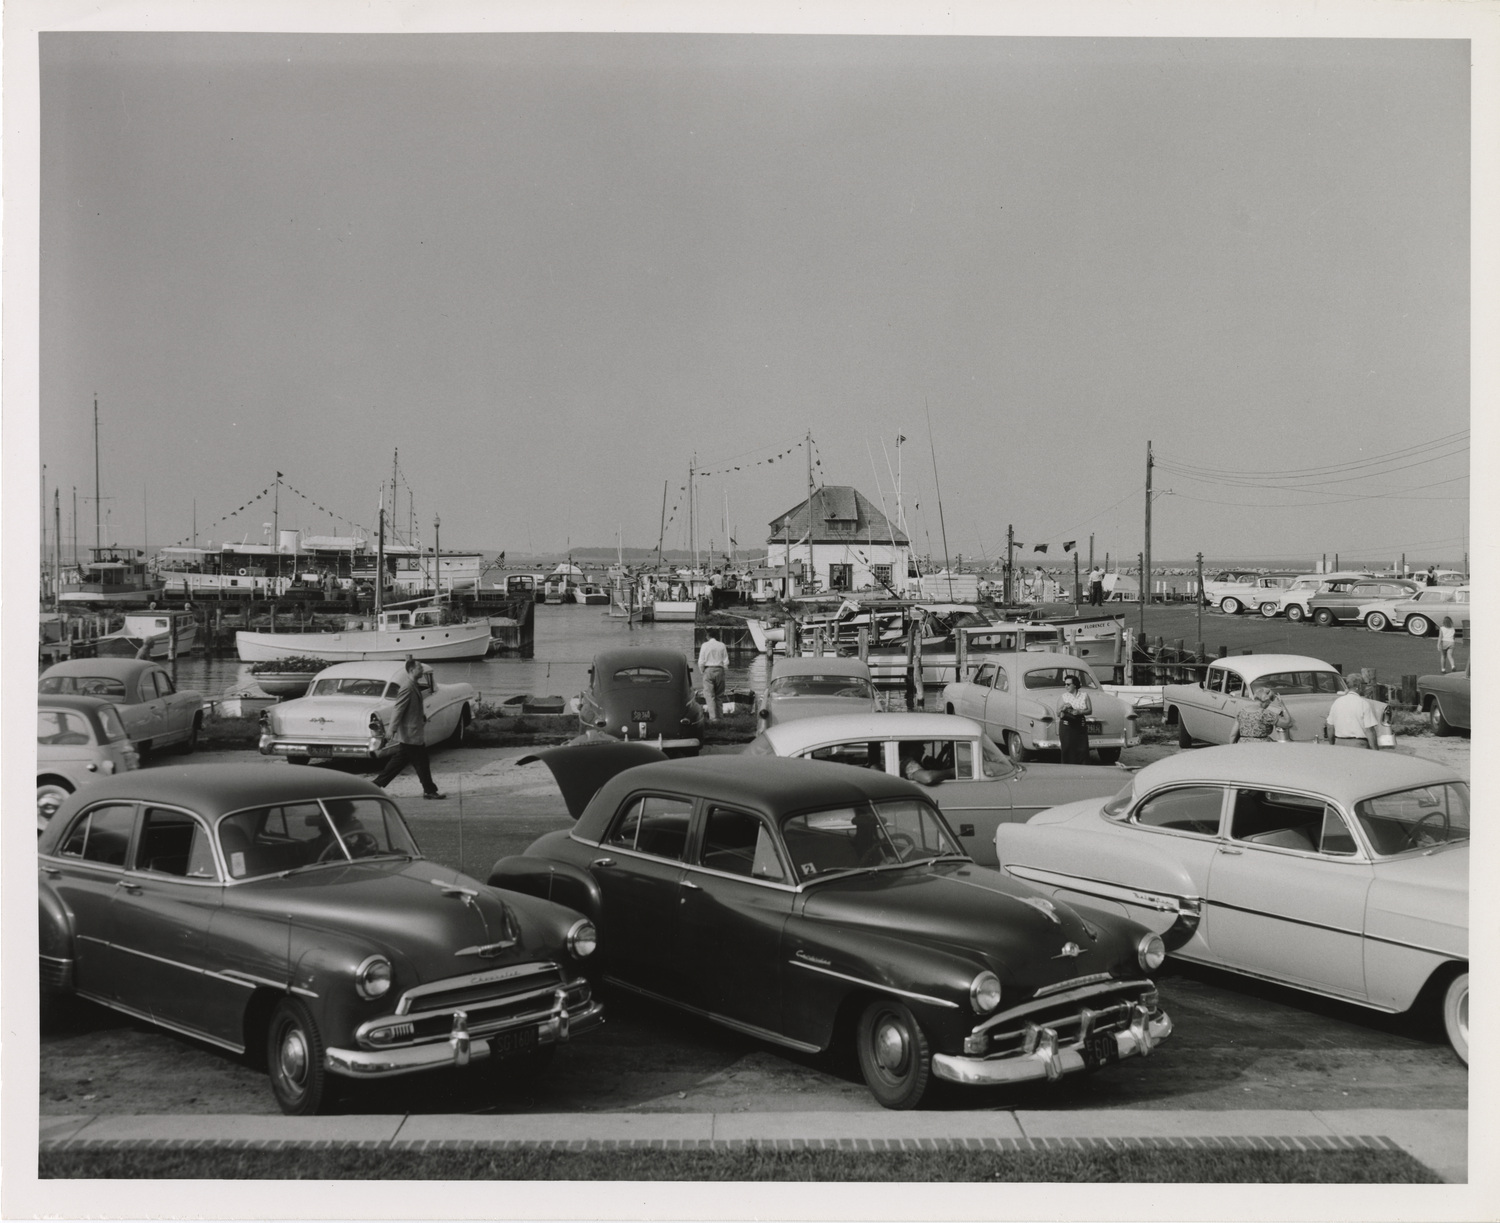 Cars parked on Bay Street with the Sag Harbor Yacht Club in the distance on Labor Day weekend in 1957 when the village celebrated its 250th anniversary. COURTESY JOHN JERMAIN MEMORIAL LIBRARY